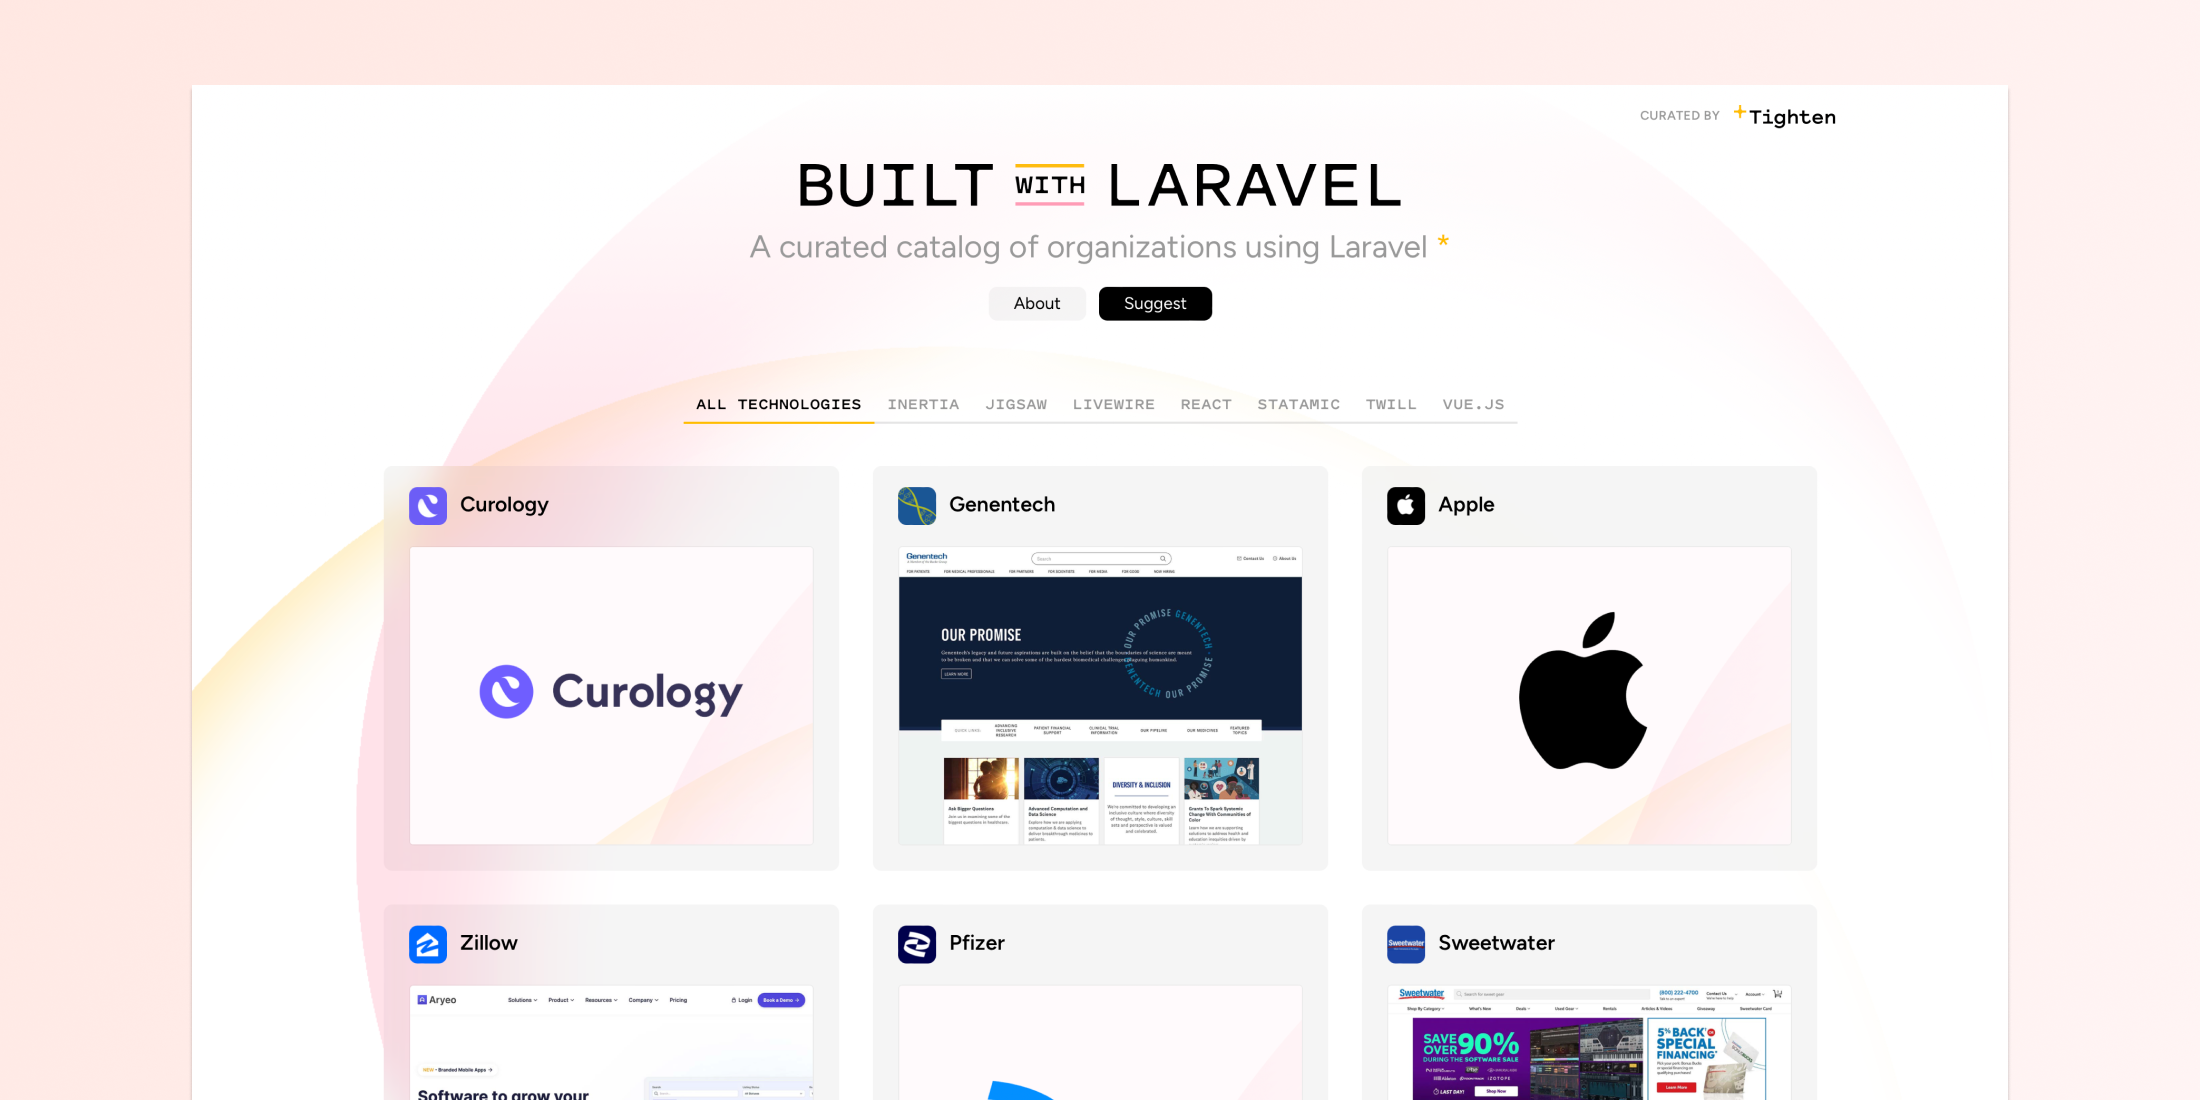 Introducing Built with Laravel